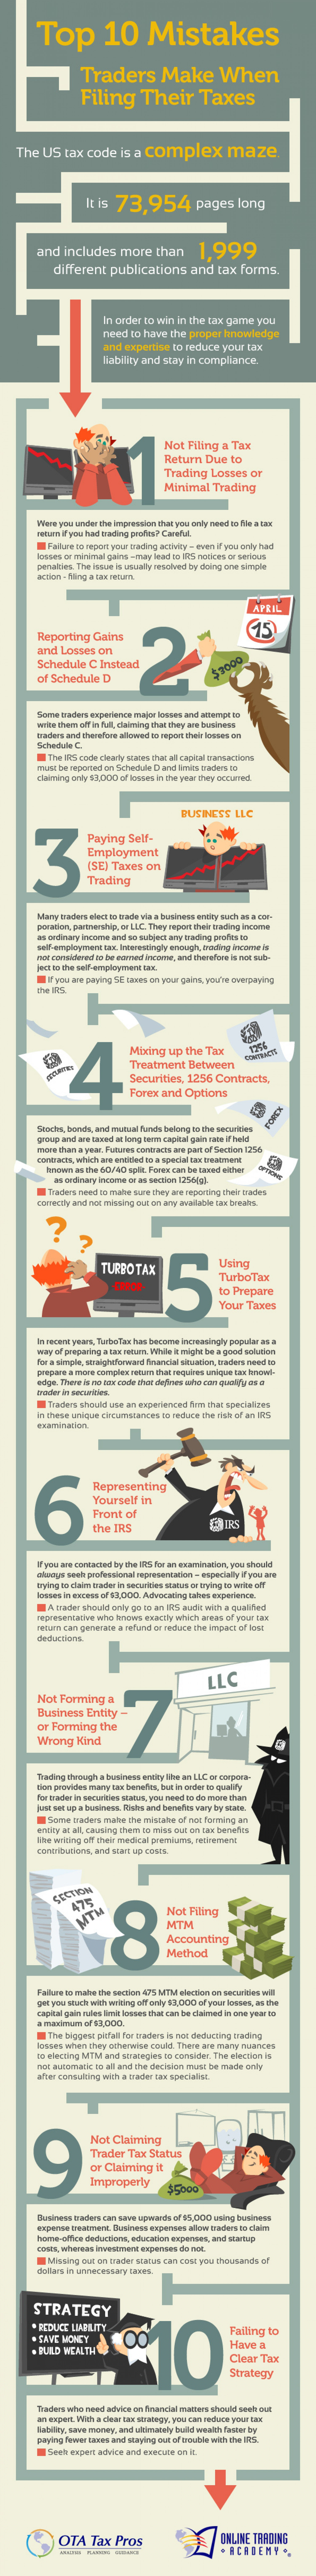 trading academys top 10 tax mistakes traders make 533563573ba93 w1500 Best Infographics For Your Inspiration